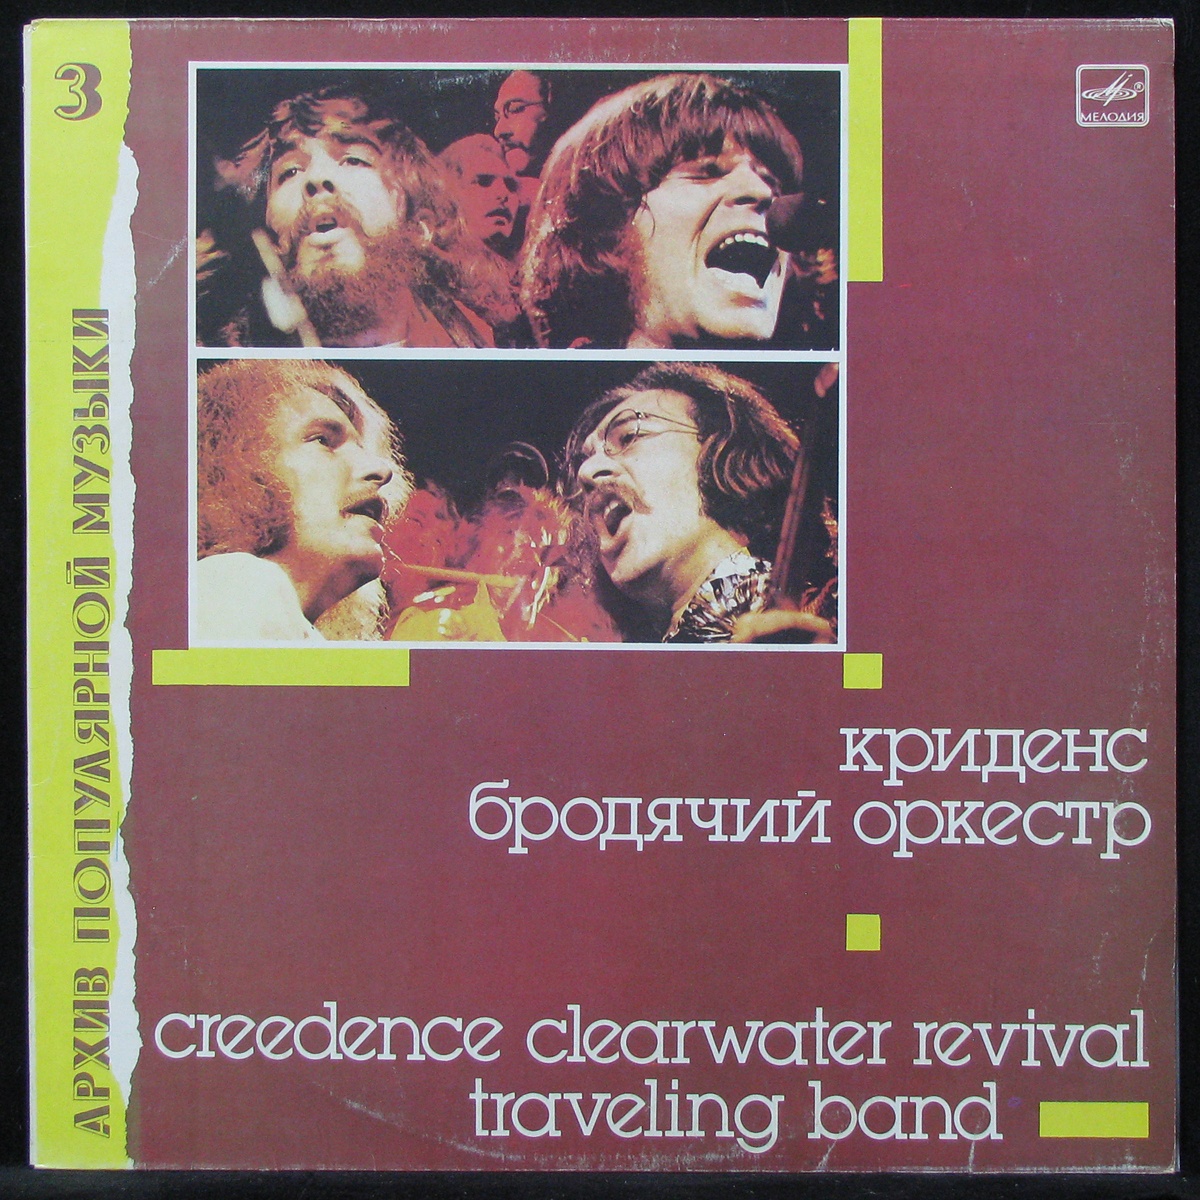 LP Creedence Clearwater Revival — Traveling Band = Бродячий Оркестр фото